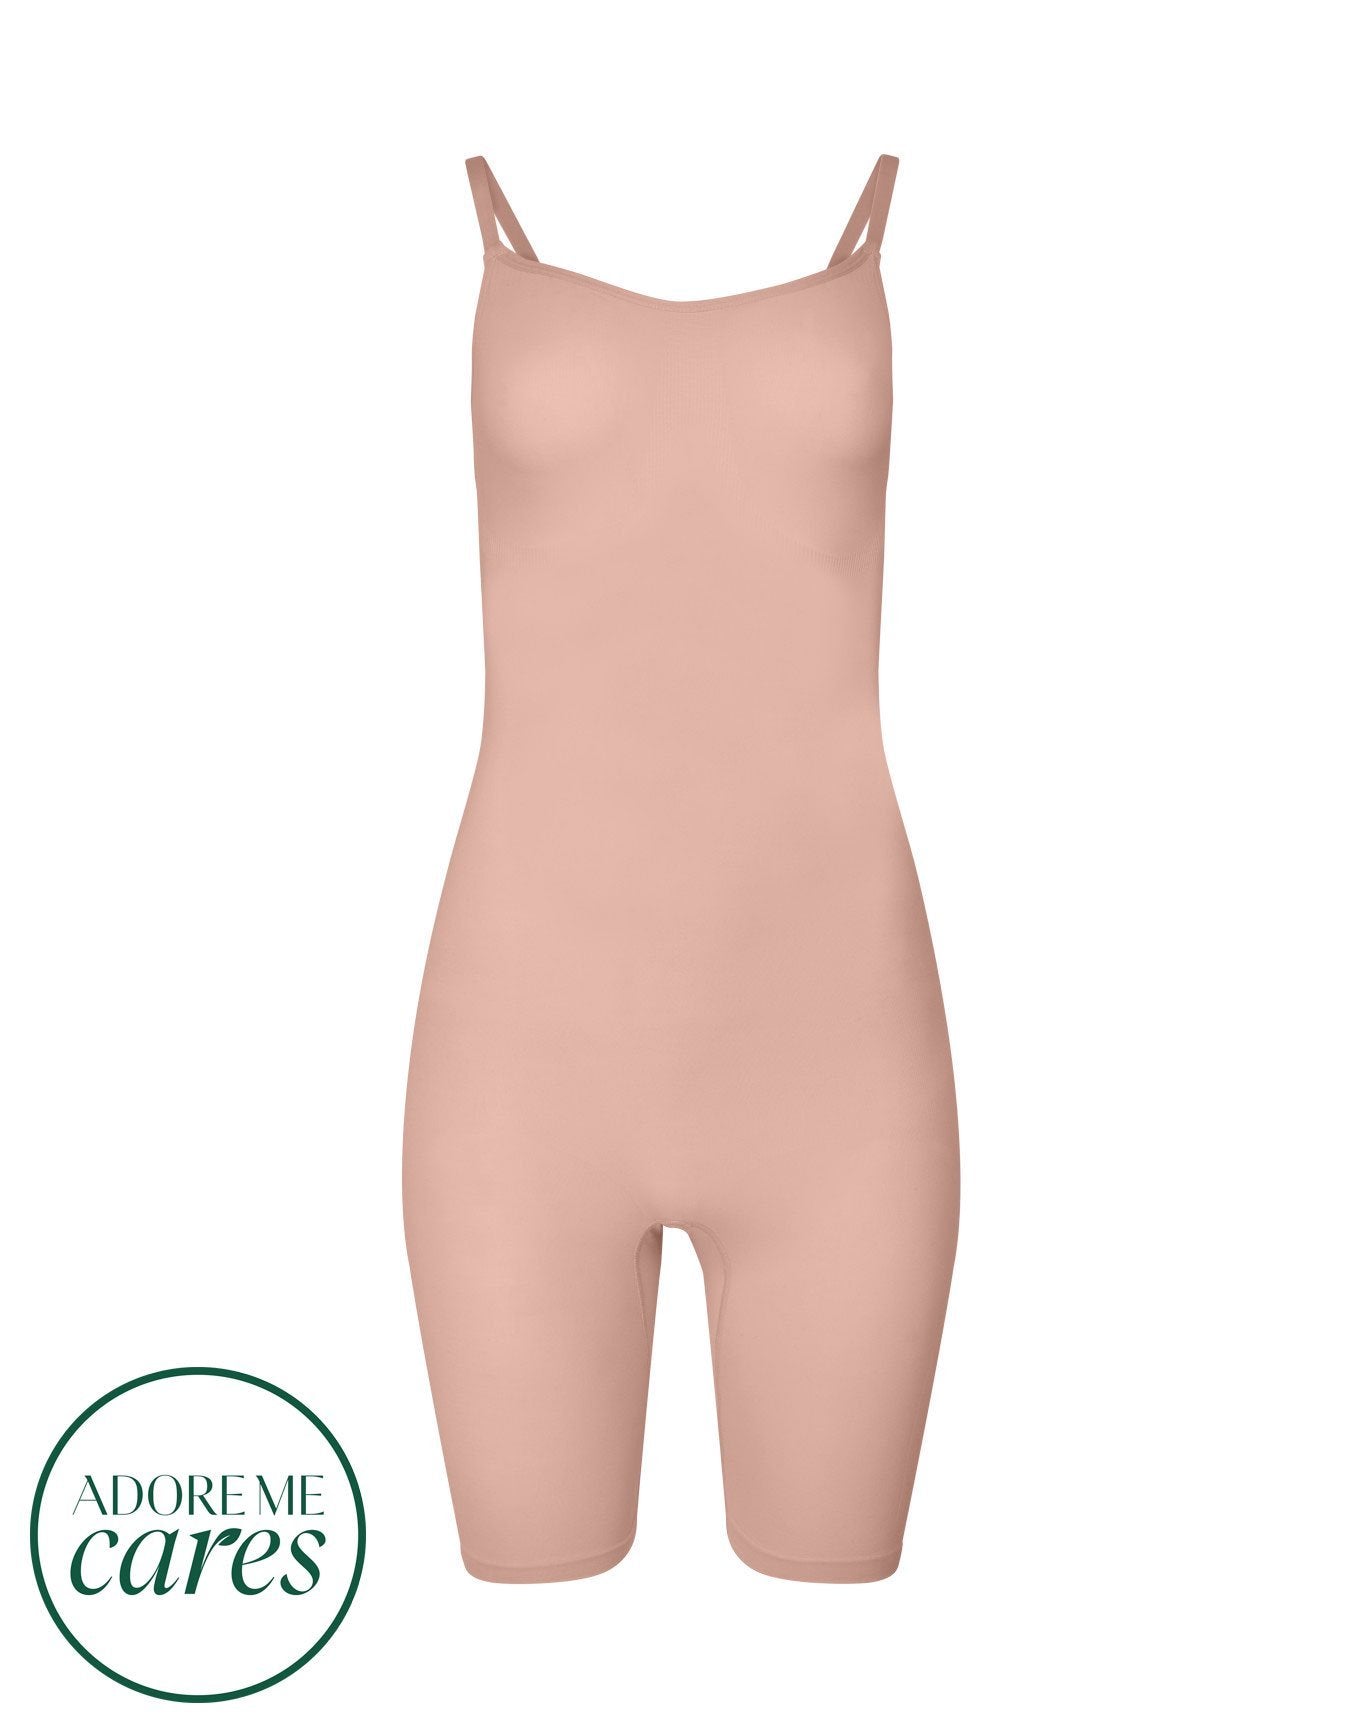 nueskin Analise High-Compression Bodysuit in color Rose Cloud and shape bodysuit